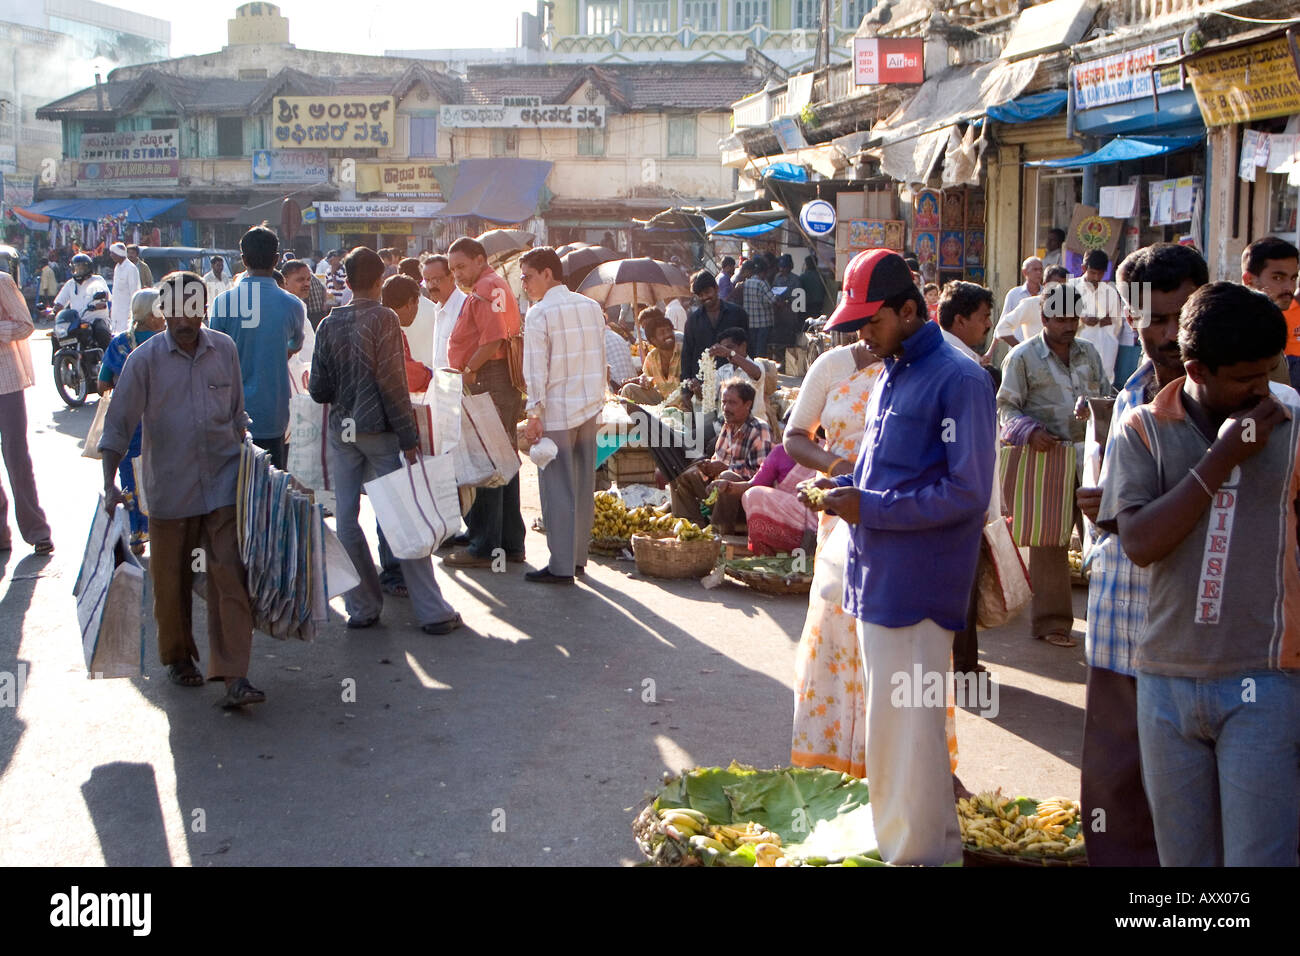 A street scene from central Mysore near to the city's Devaraja Urs Market. People trade flowers and other goods to bypassers. Stock Photo